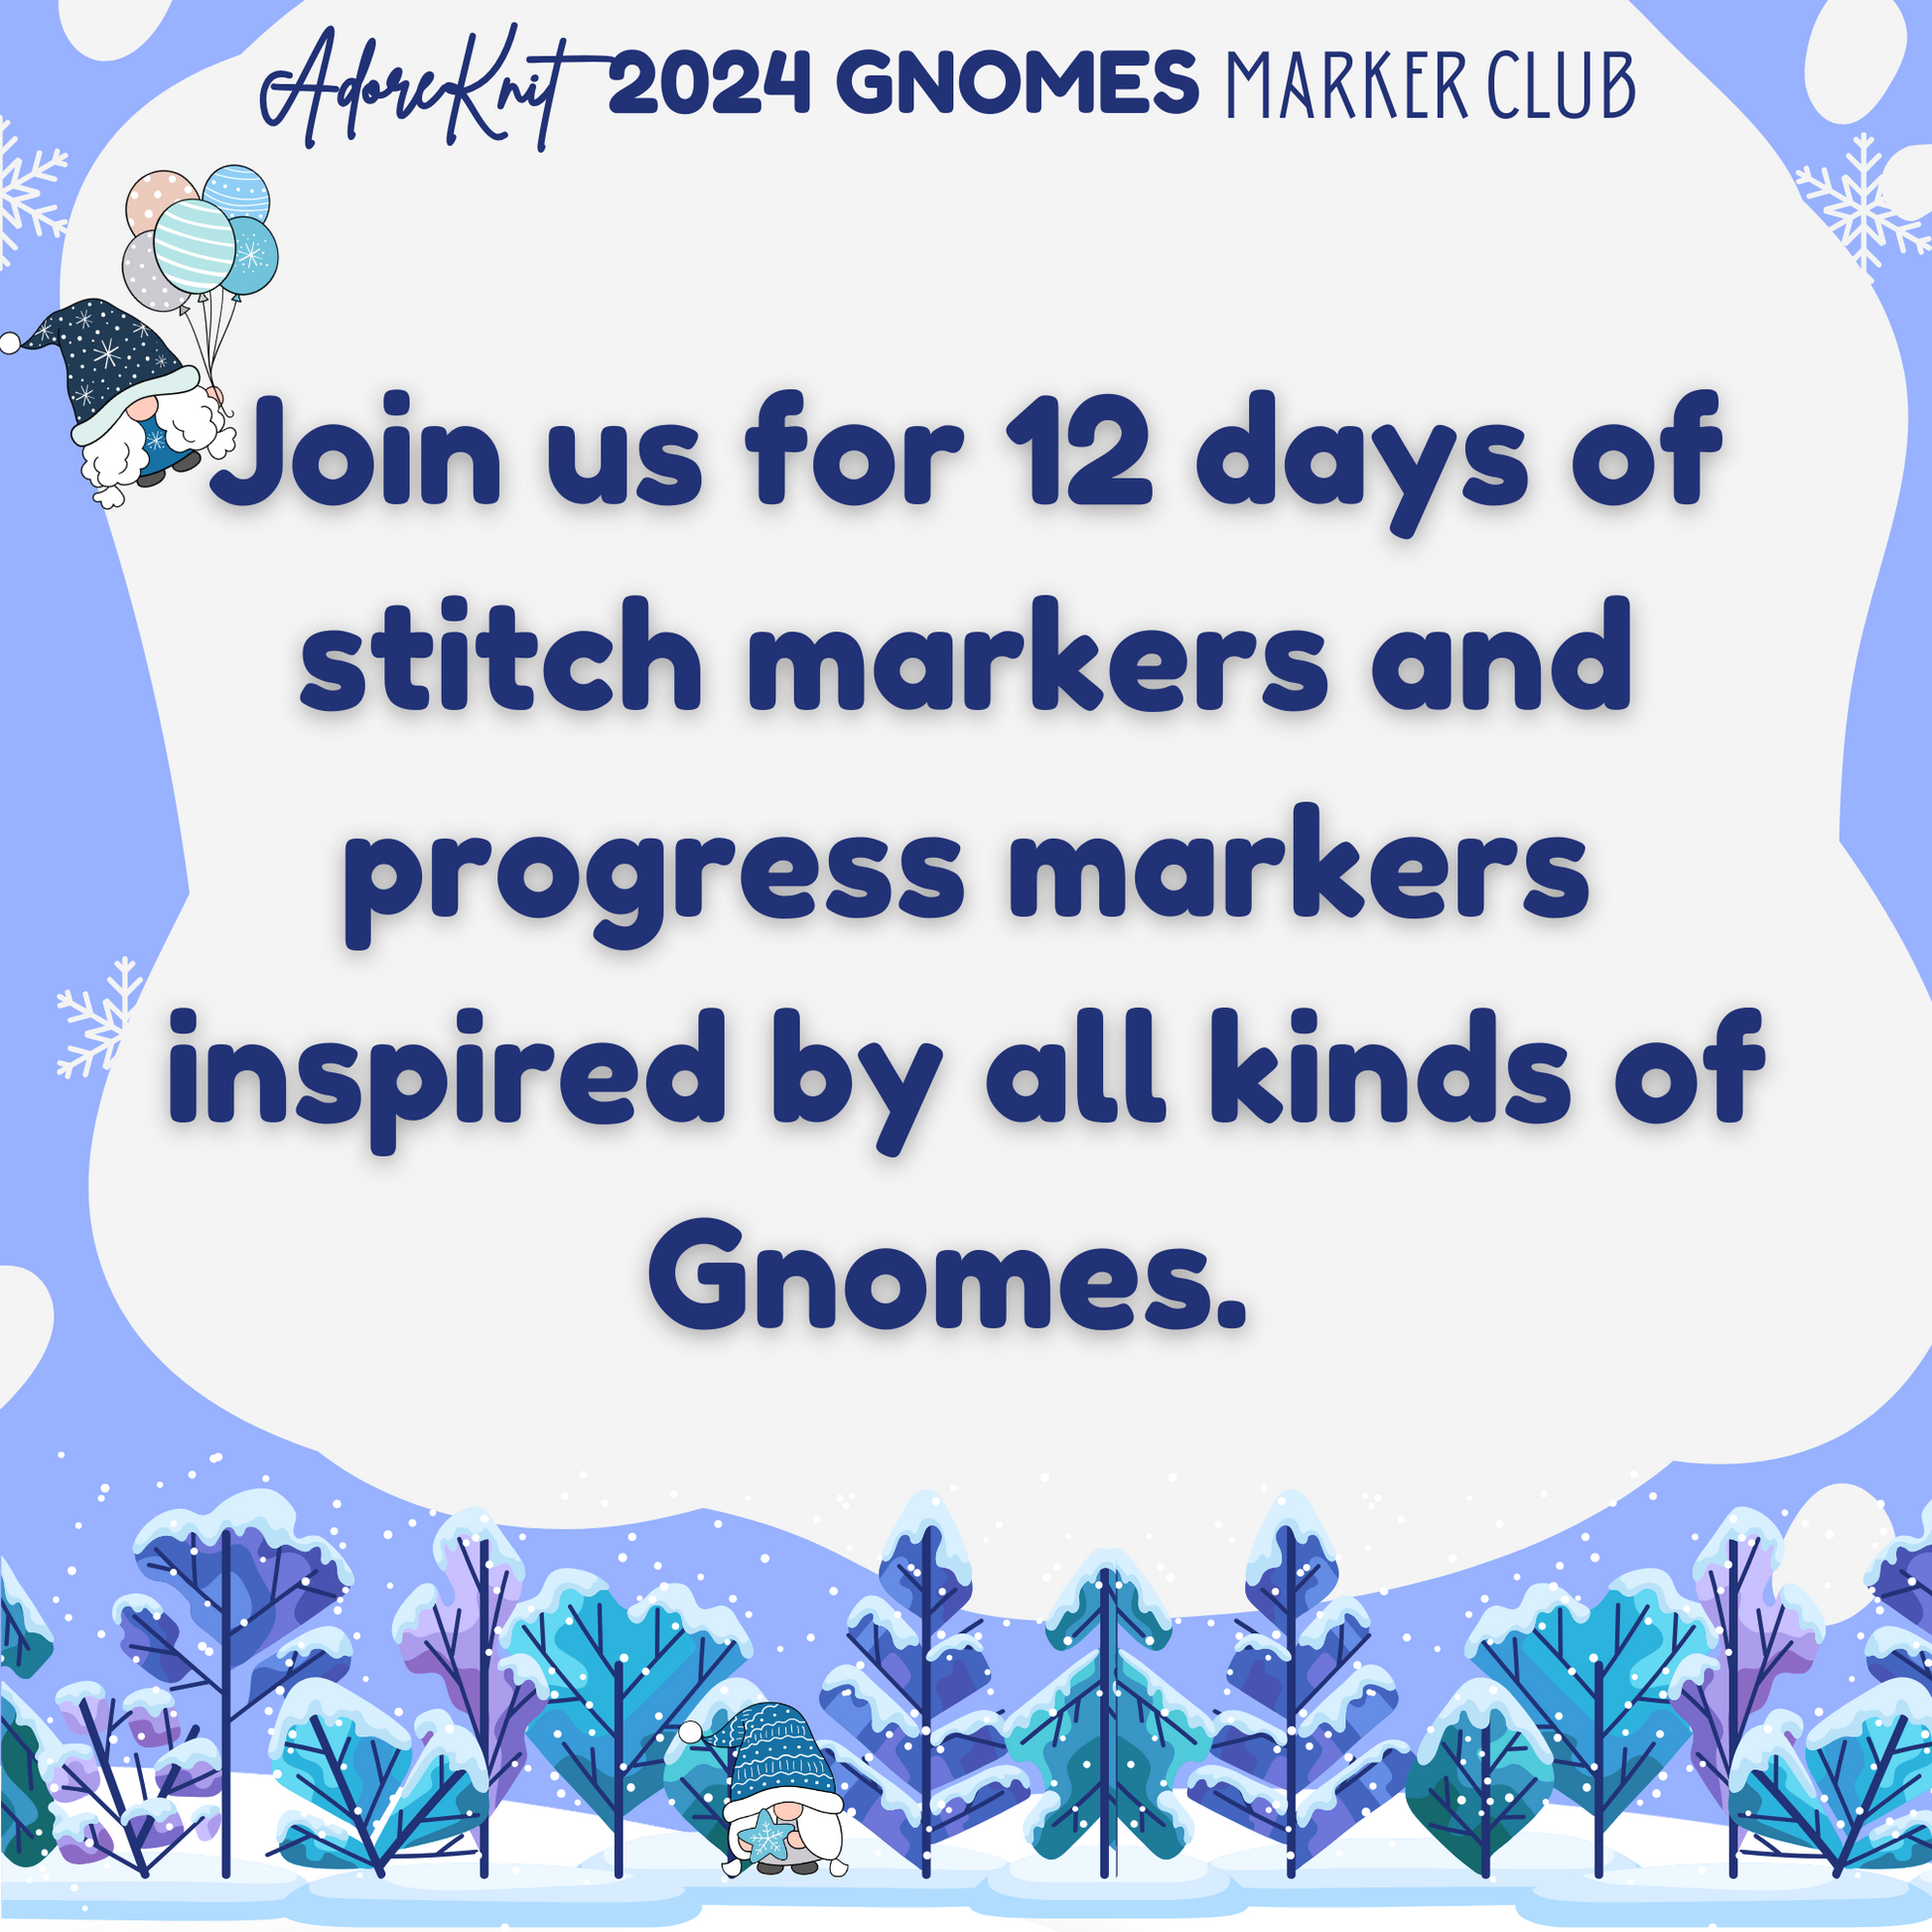 2024 GNOMES Countdown Club, 12 Days of Progress & Stitch Markers with a Project Bag and a Skein of Yarn - AdoreKnit